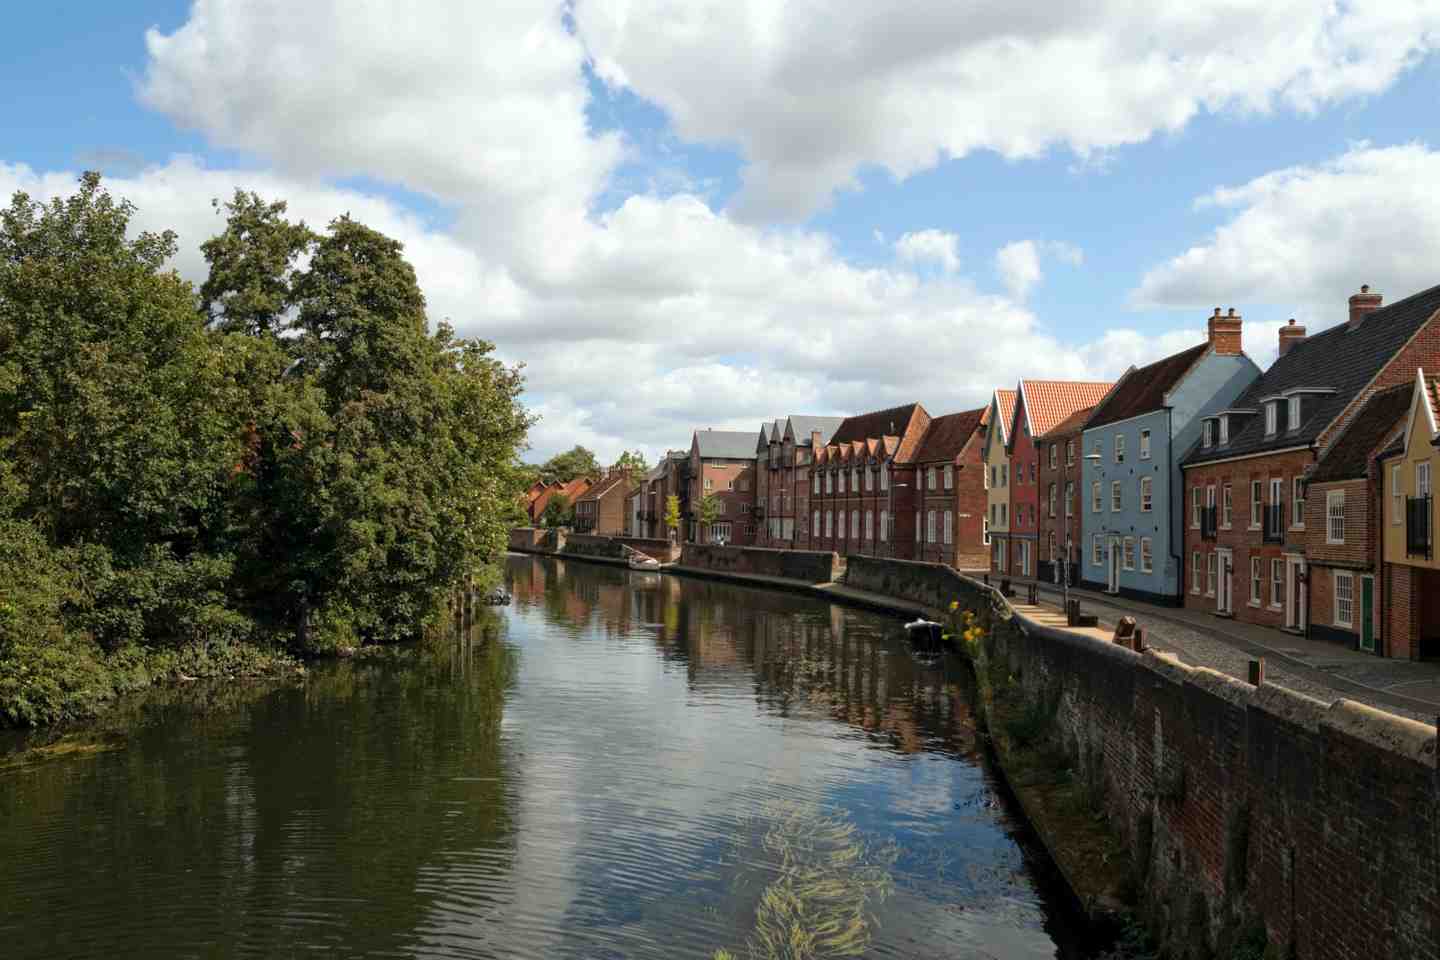 Properties along the River Wensum, as it runs through the city of Norwich